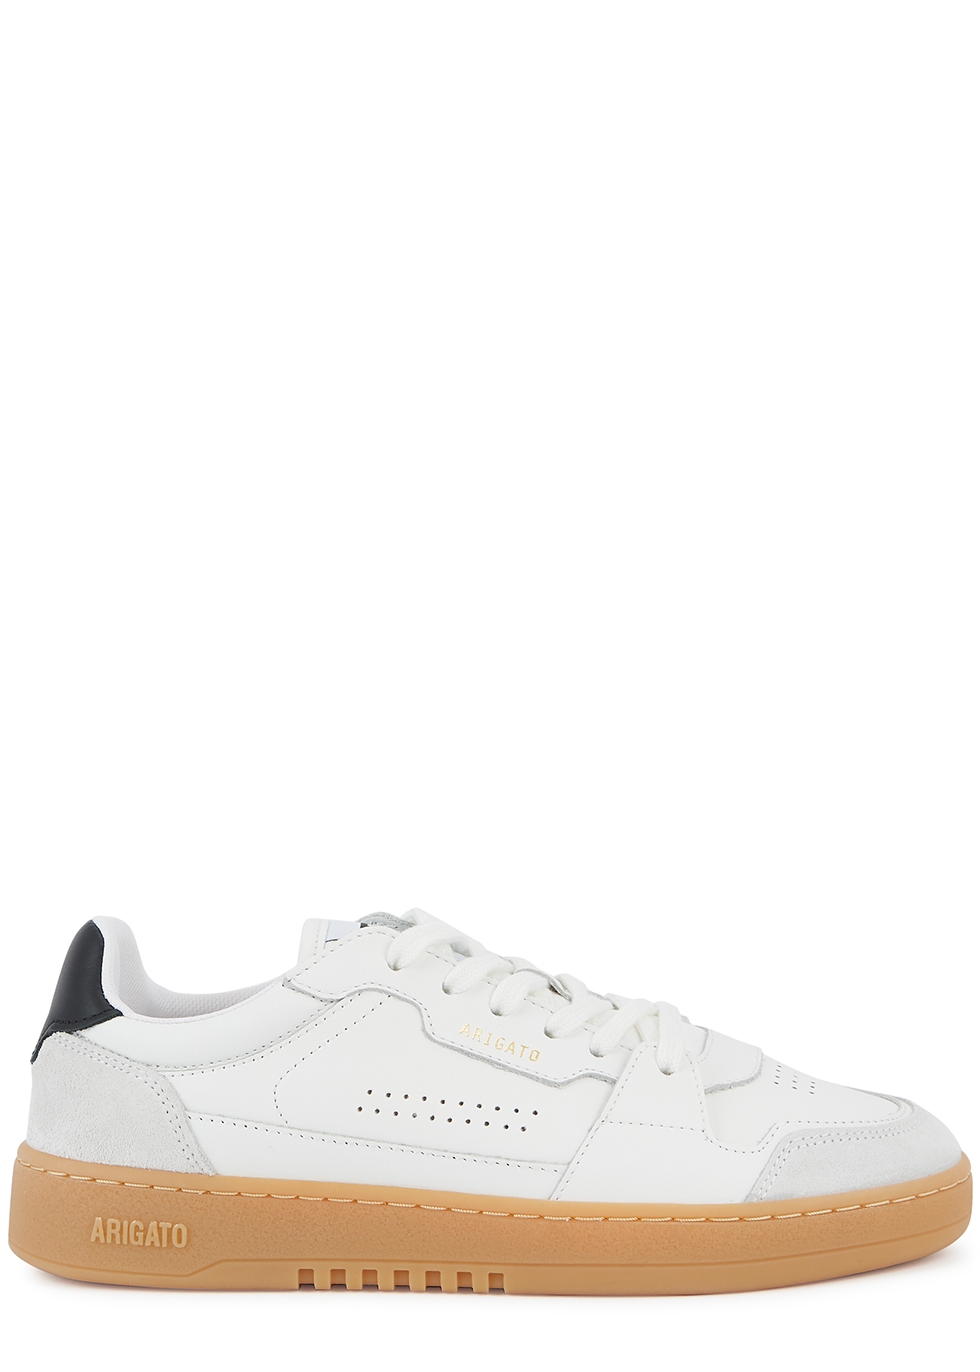 Dice white panelled leather sneakers